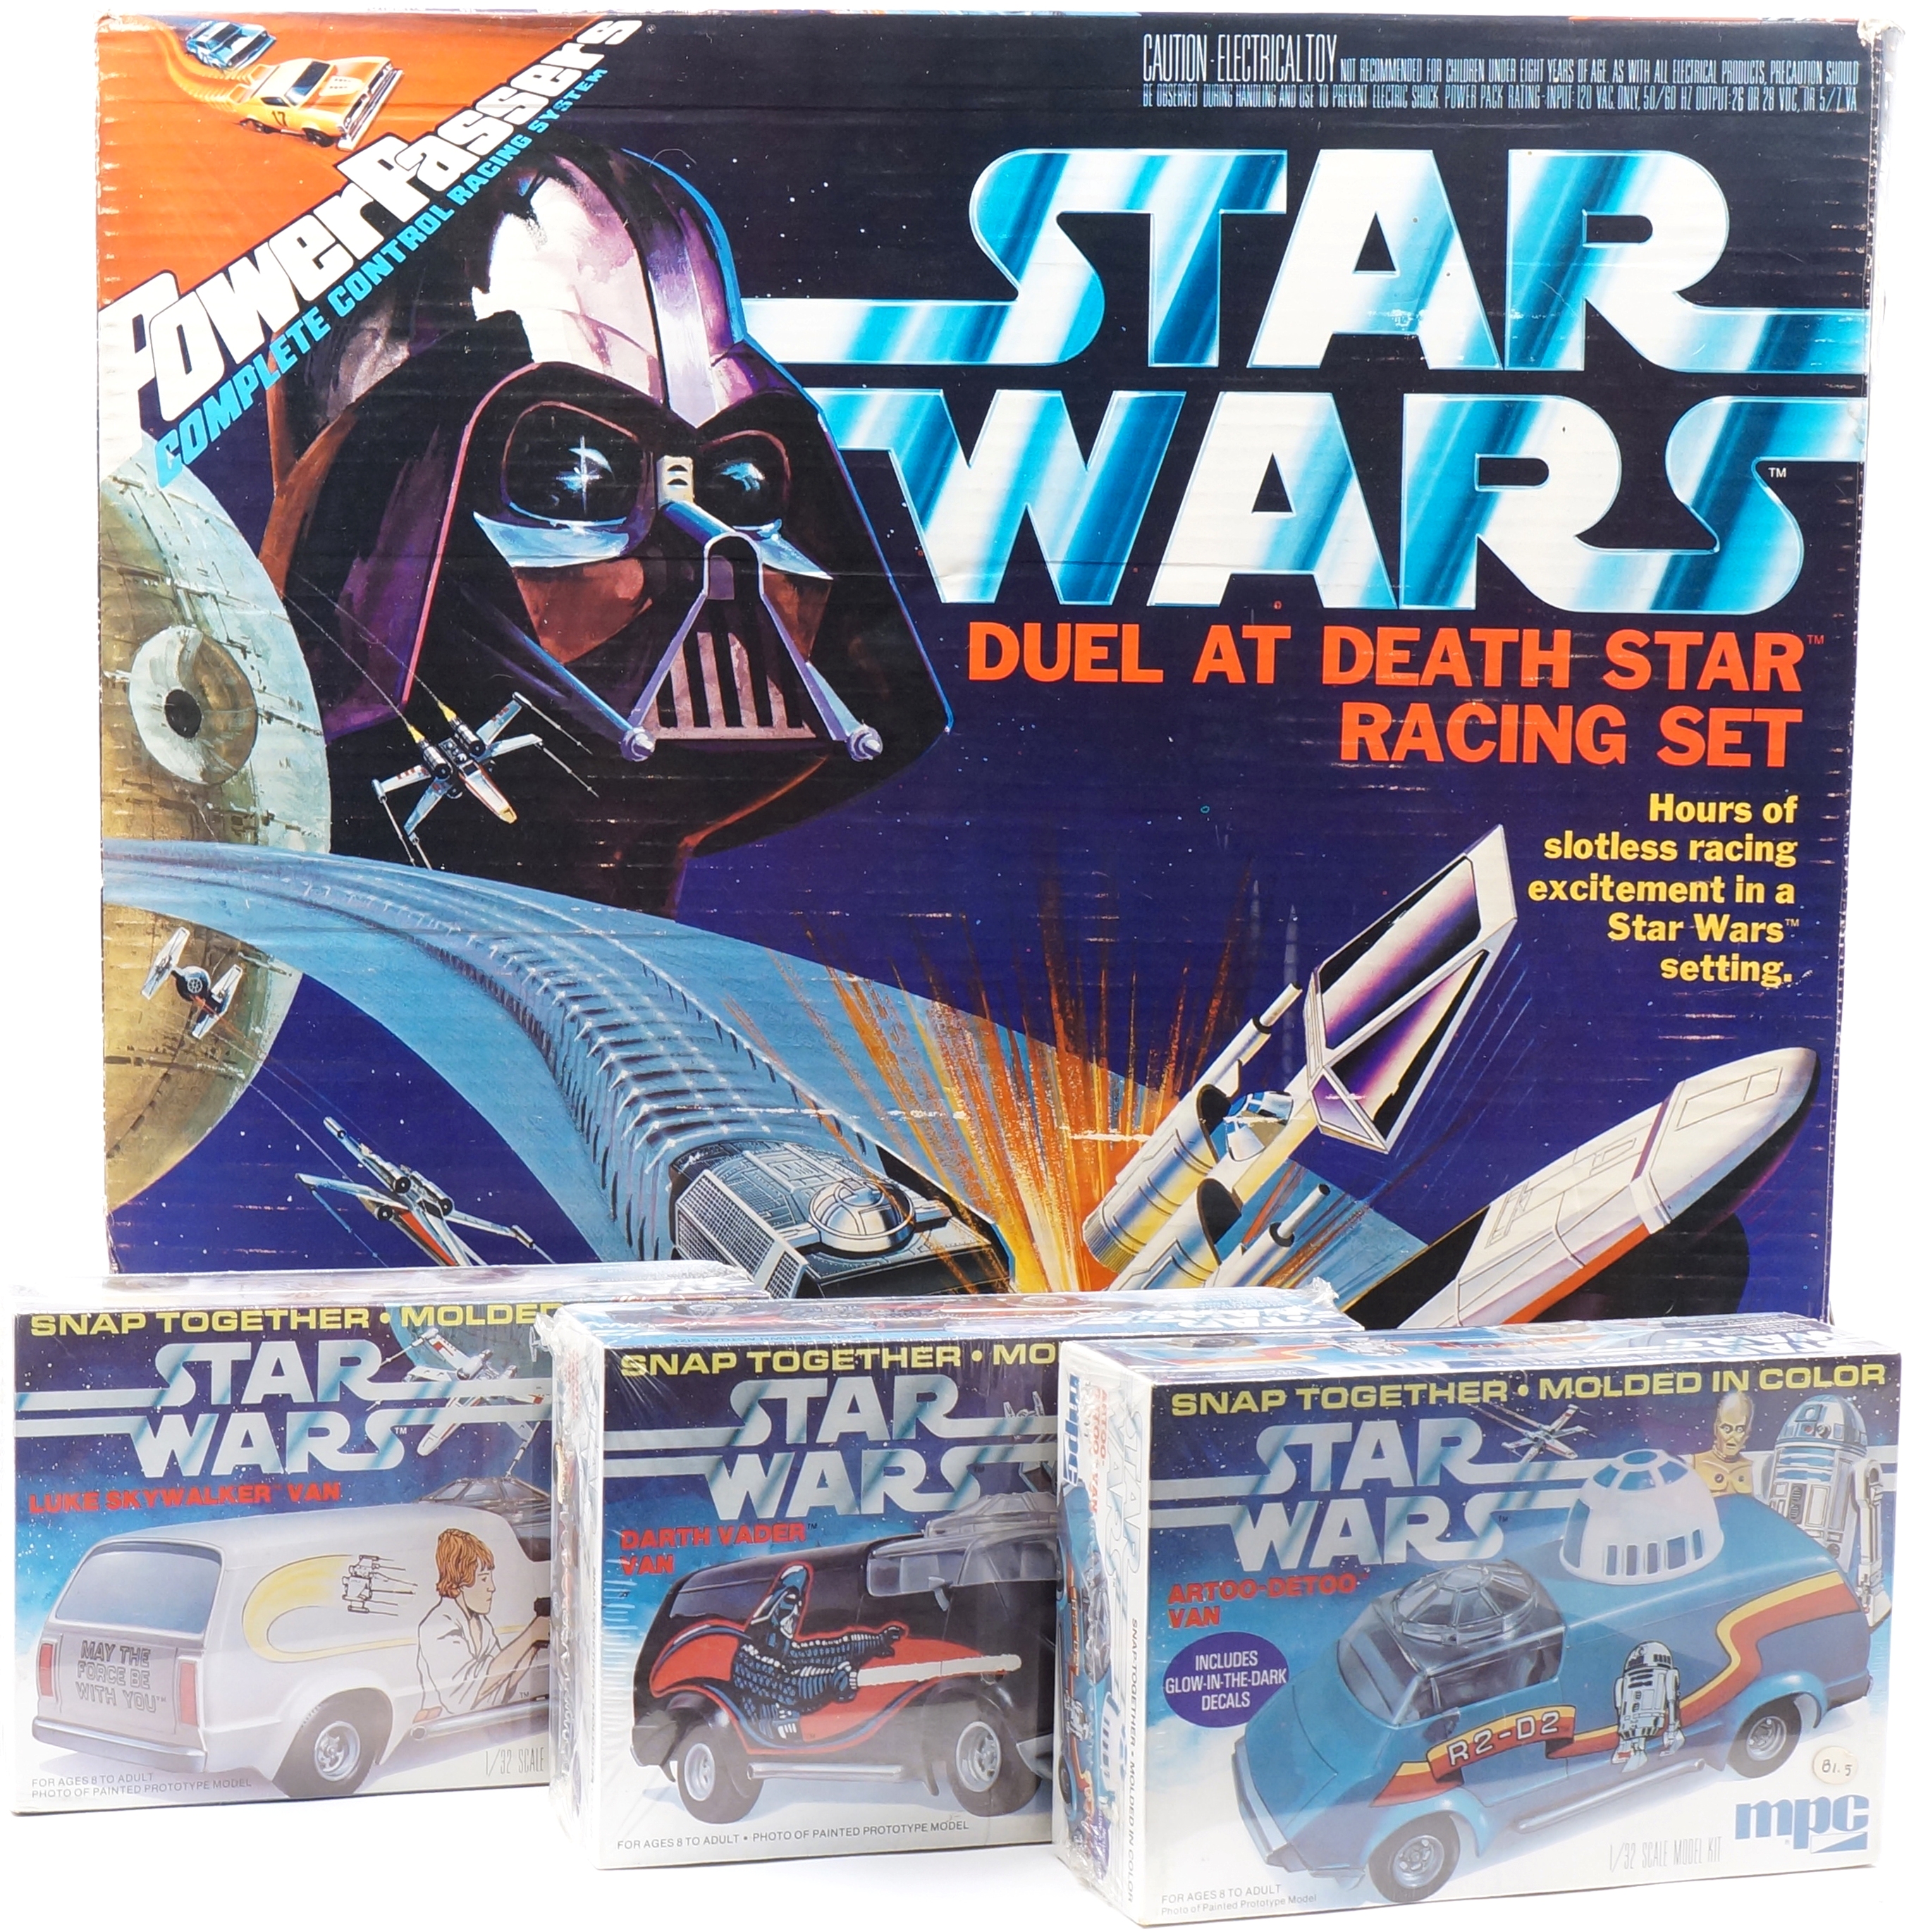 6 Star Wars Duel at Death Star Racing Set from Lionel (1978) and Star Wars Artoo-Detoo, Luke Skywalker and Darth Vader Snap-Together Van Kits from MPC (1978)